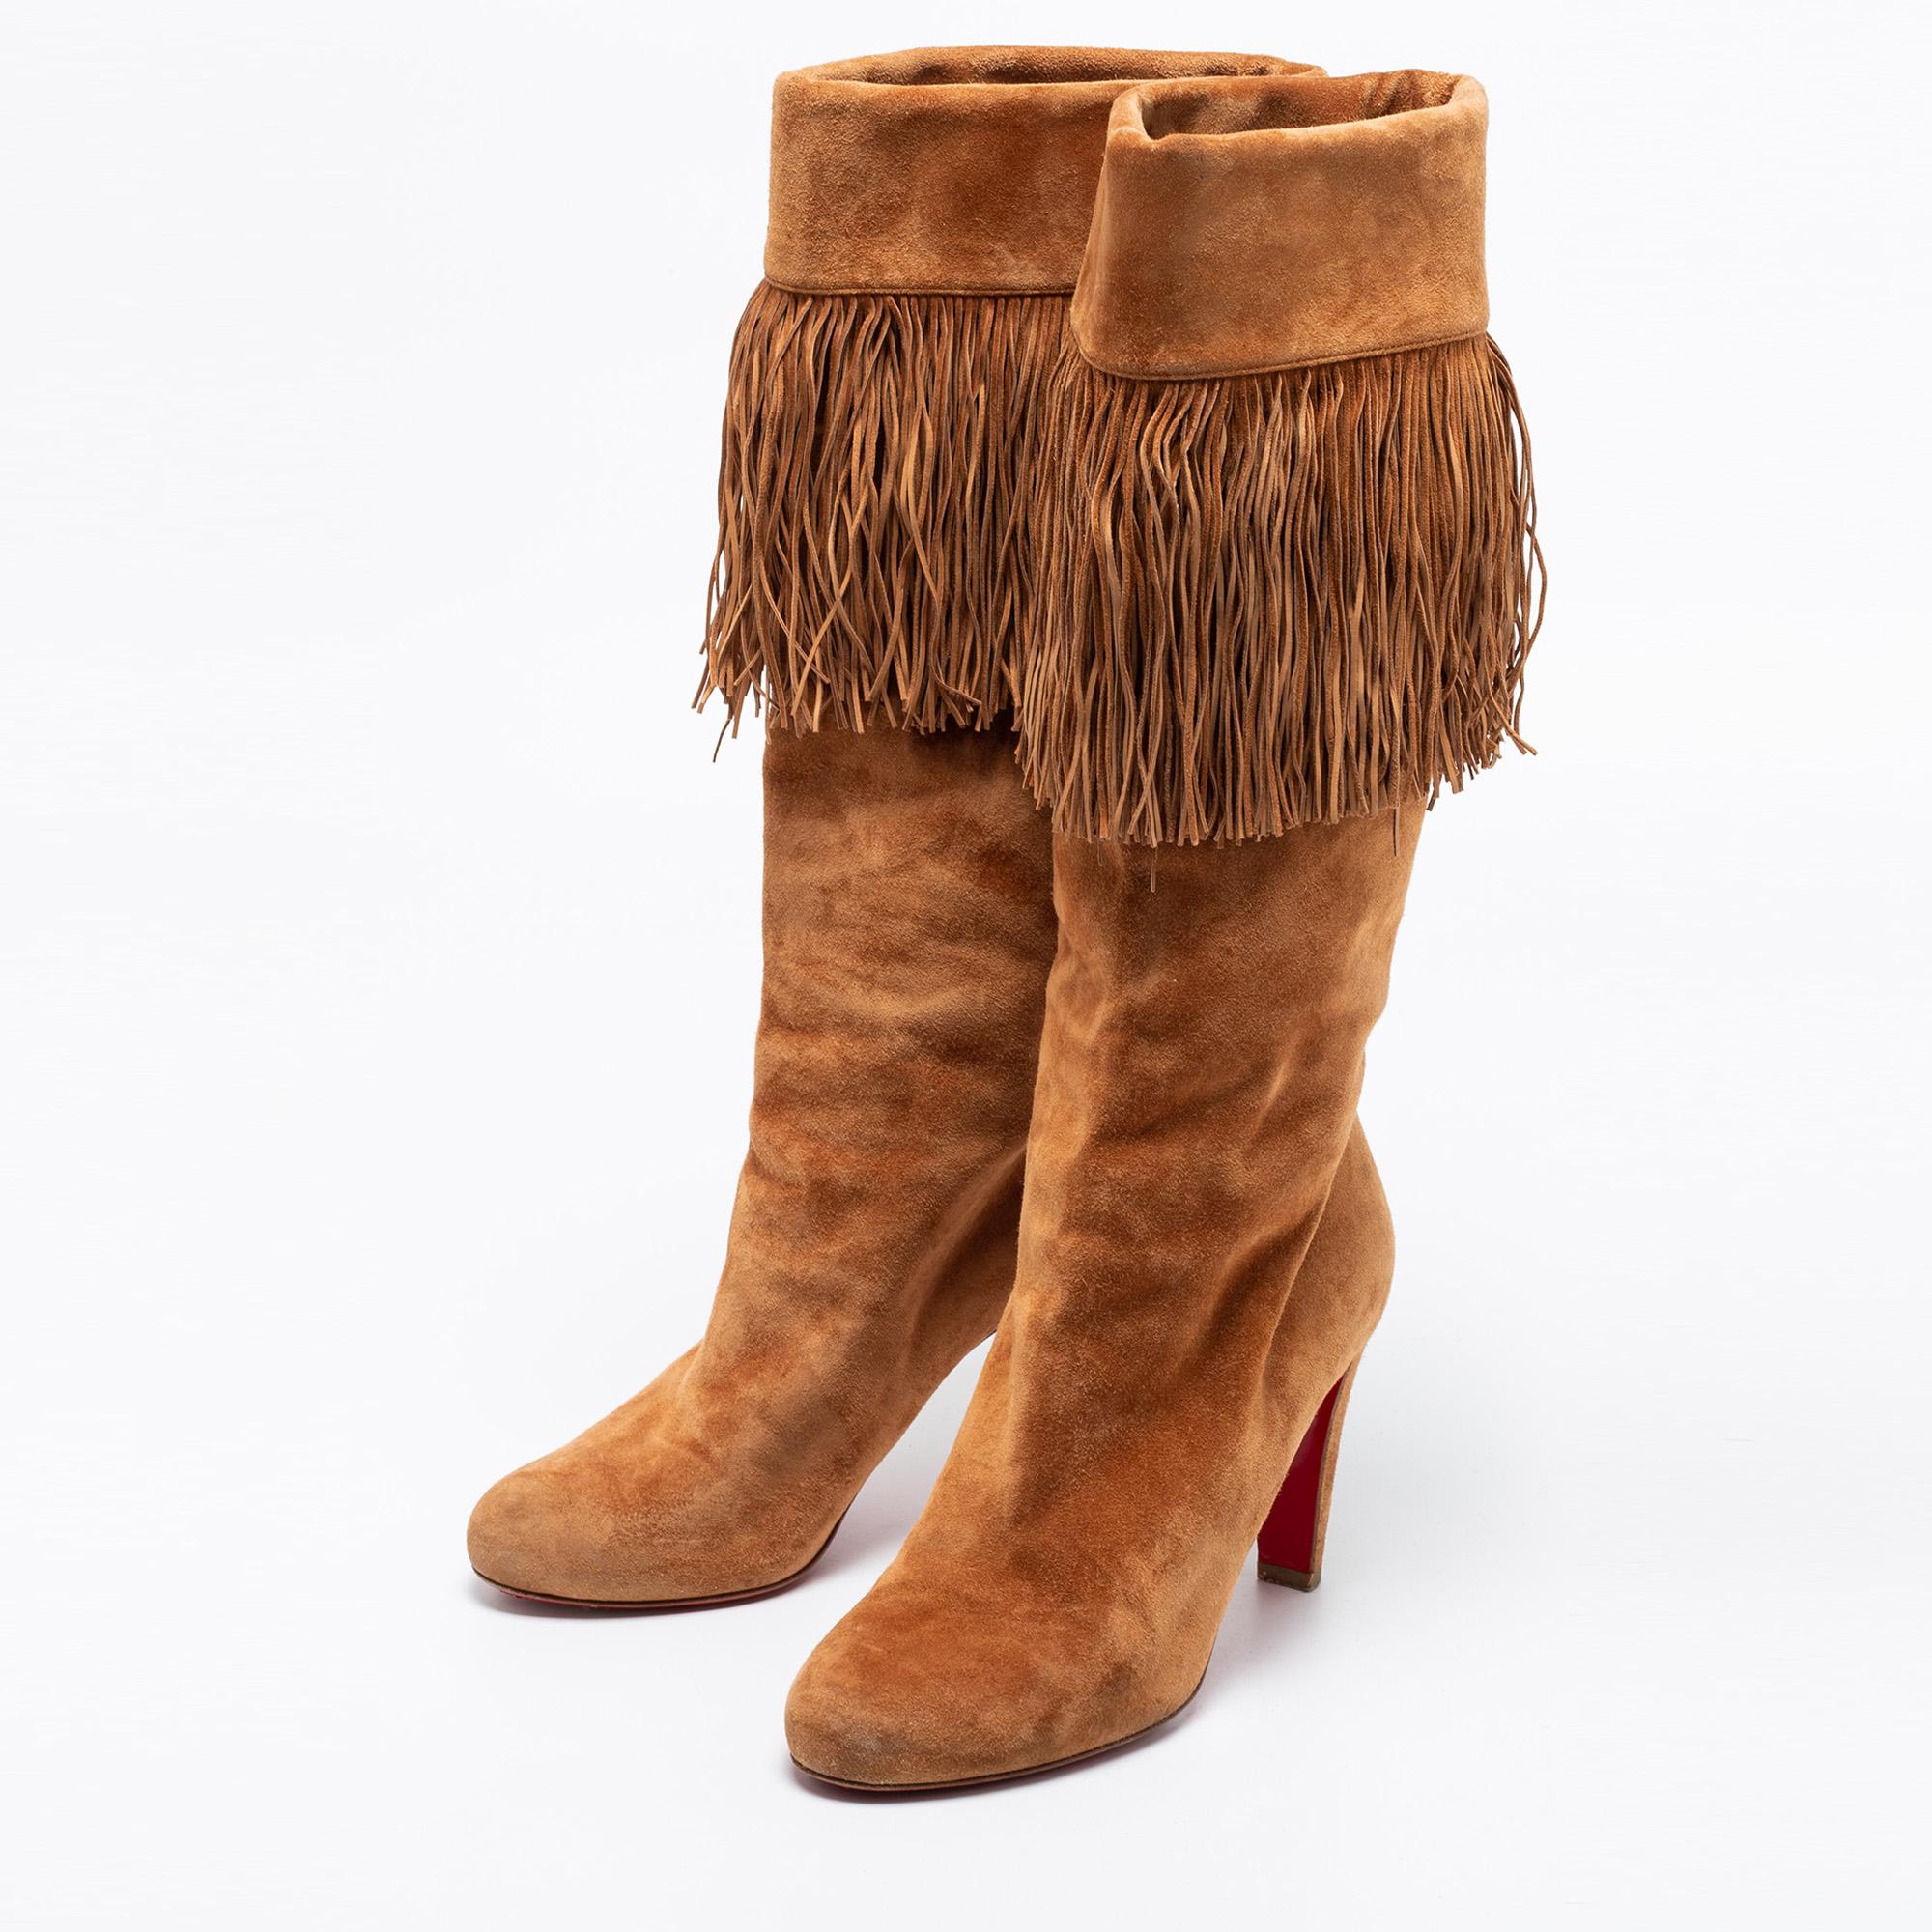 Christian Louboutin Brown Suede Fringe Mid Calf Boots Size 38 1